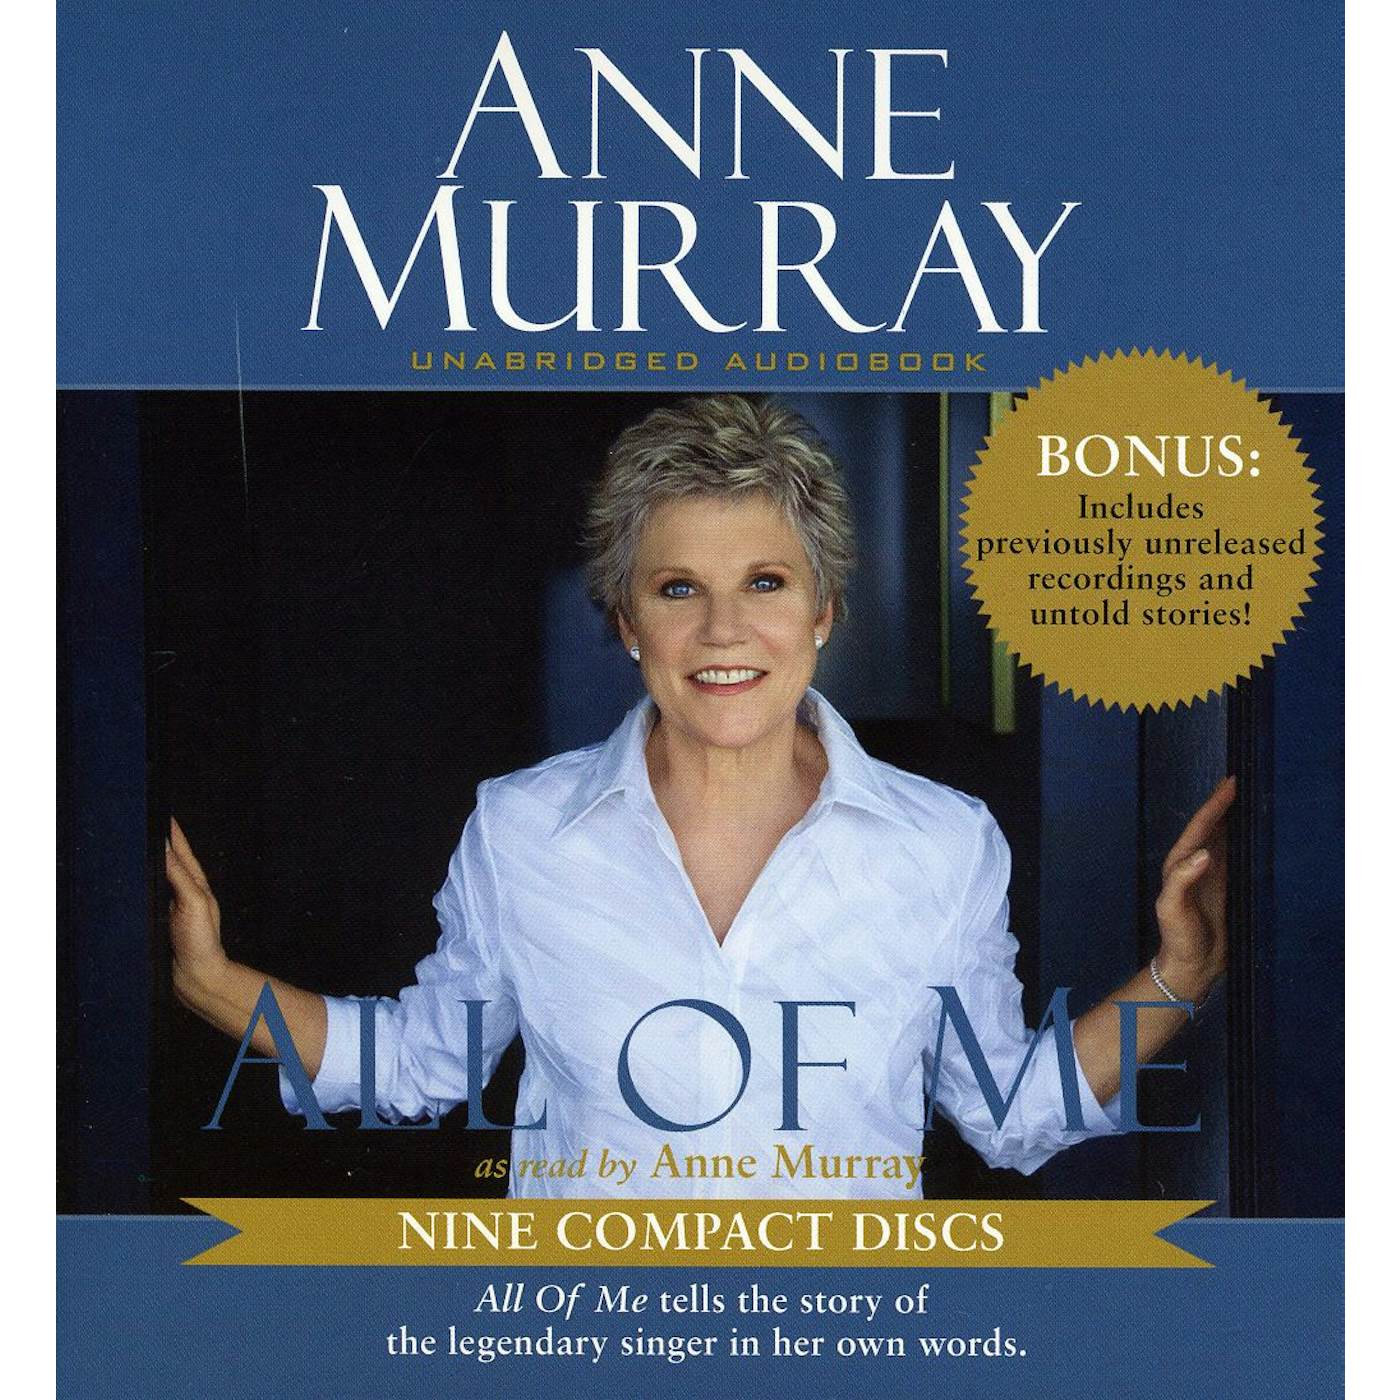 Anne Murray ALL OF ME (AUDIOBOOK) CD